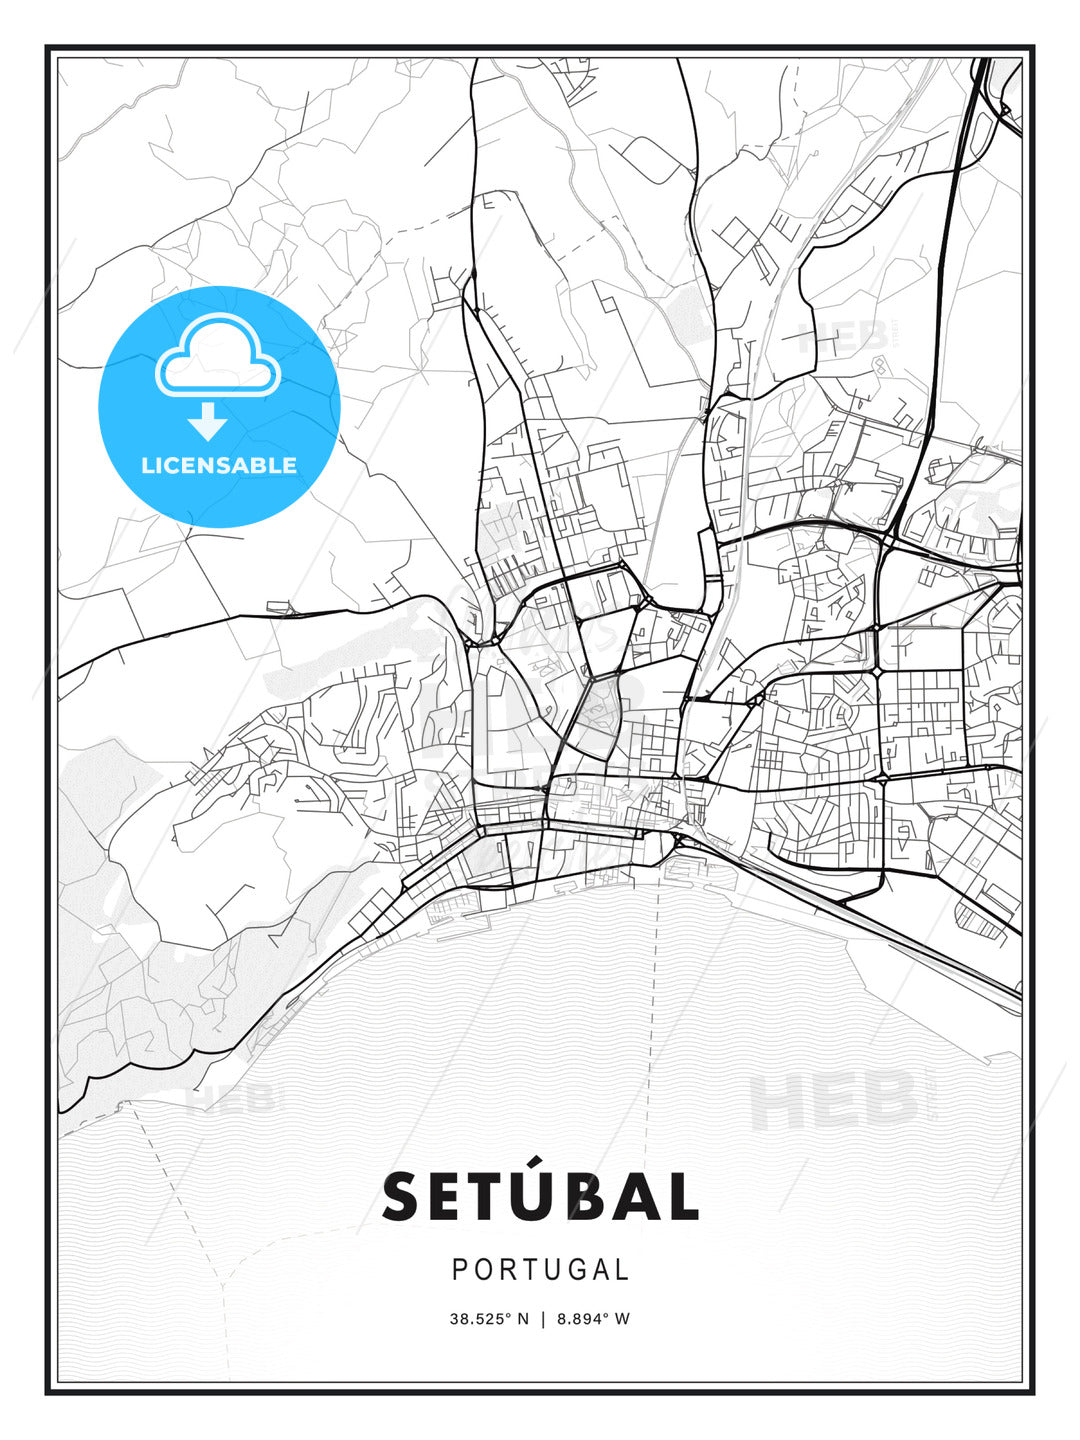 Setúbal, Portugal, Modern Print Template in Various Formats - HEBSTREITS Sketches